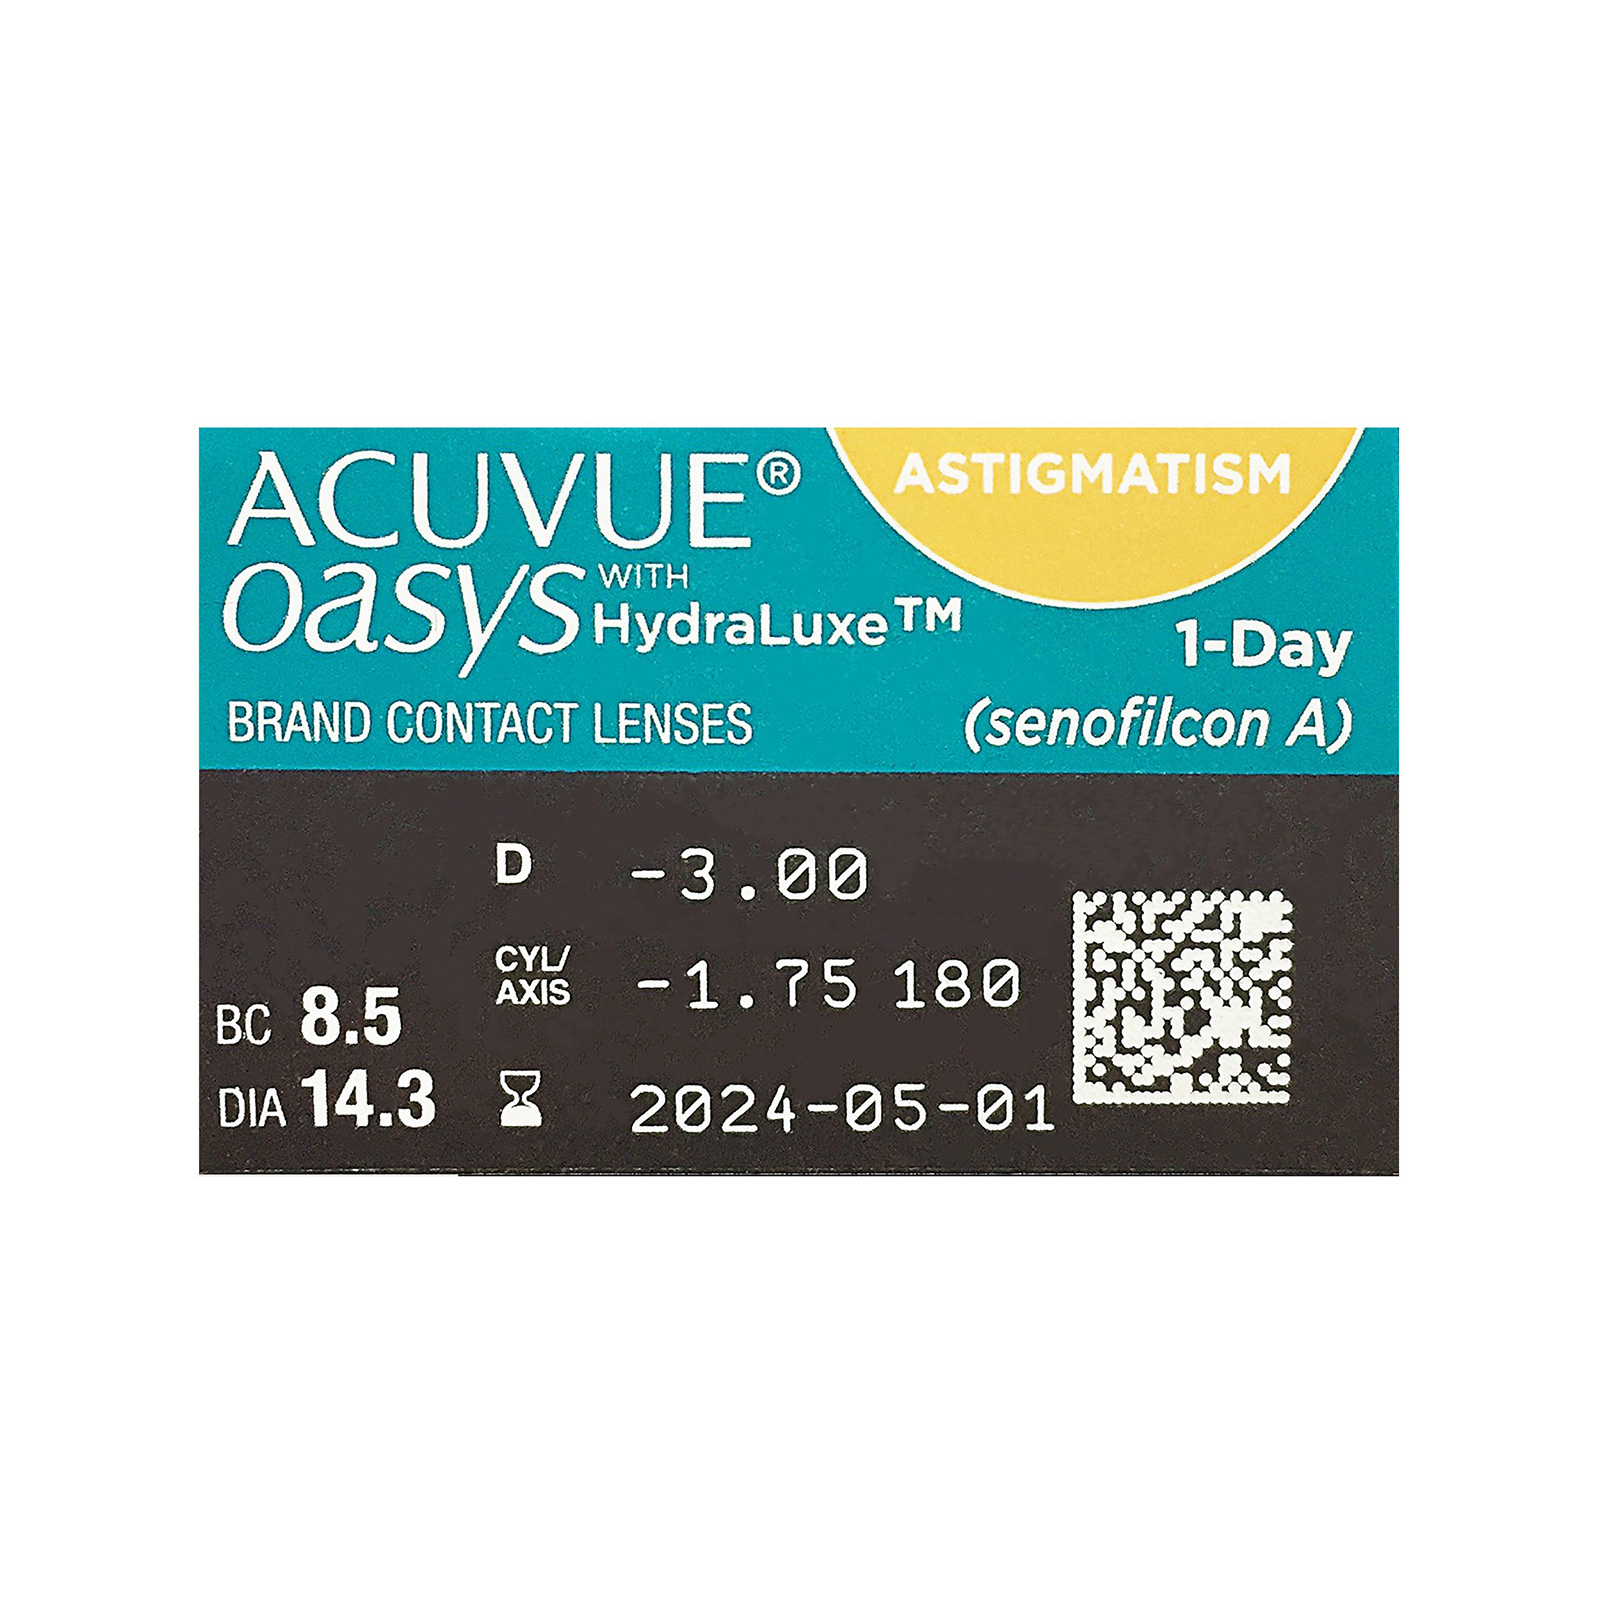 Acuvue Oasys 1-Day With HydraLuxe for Astigmatism